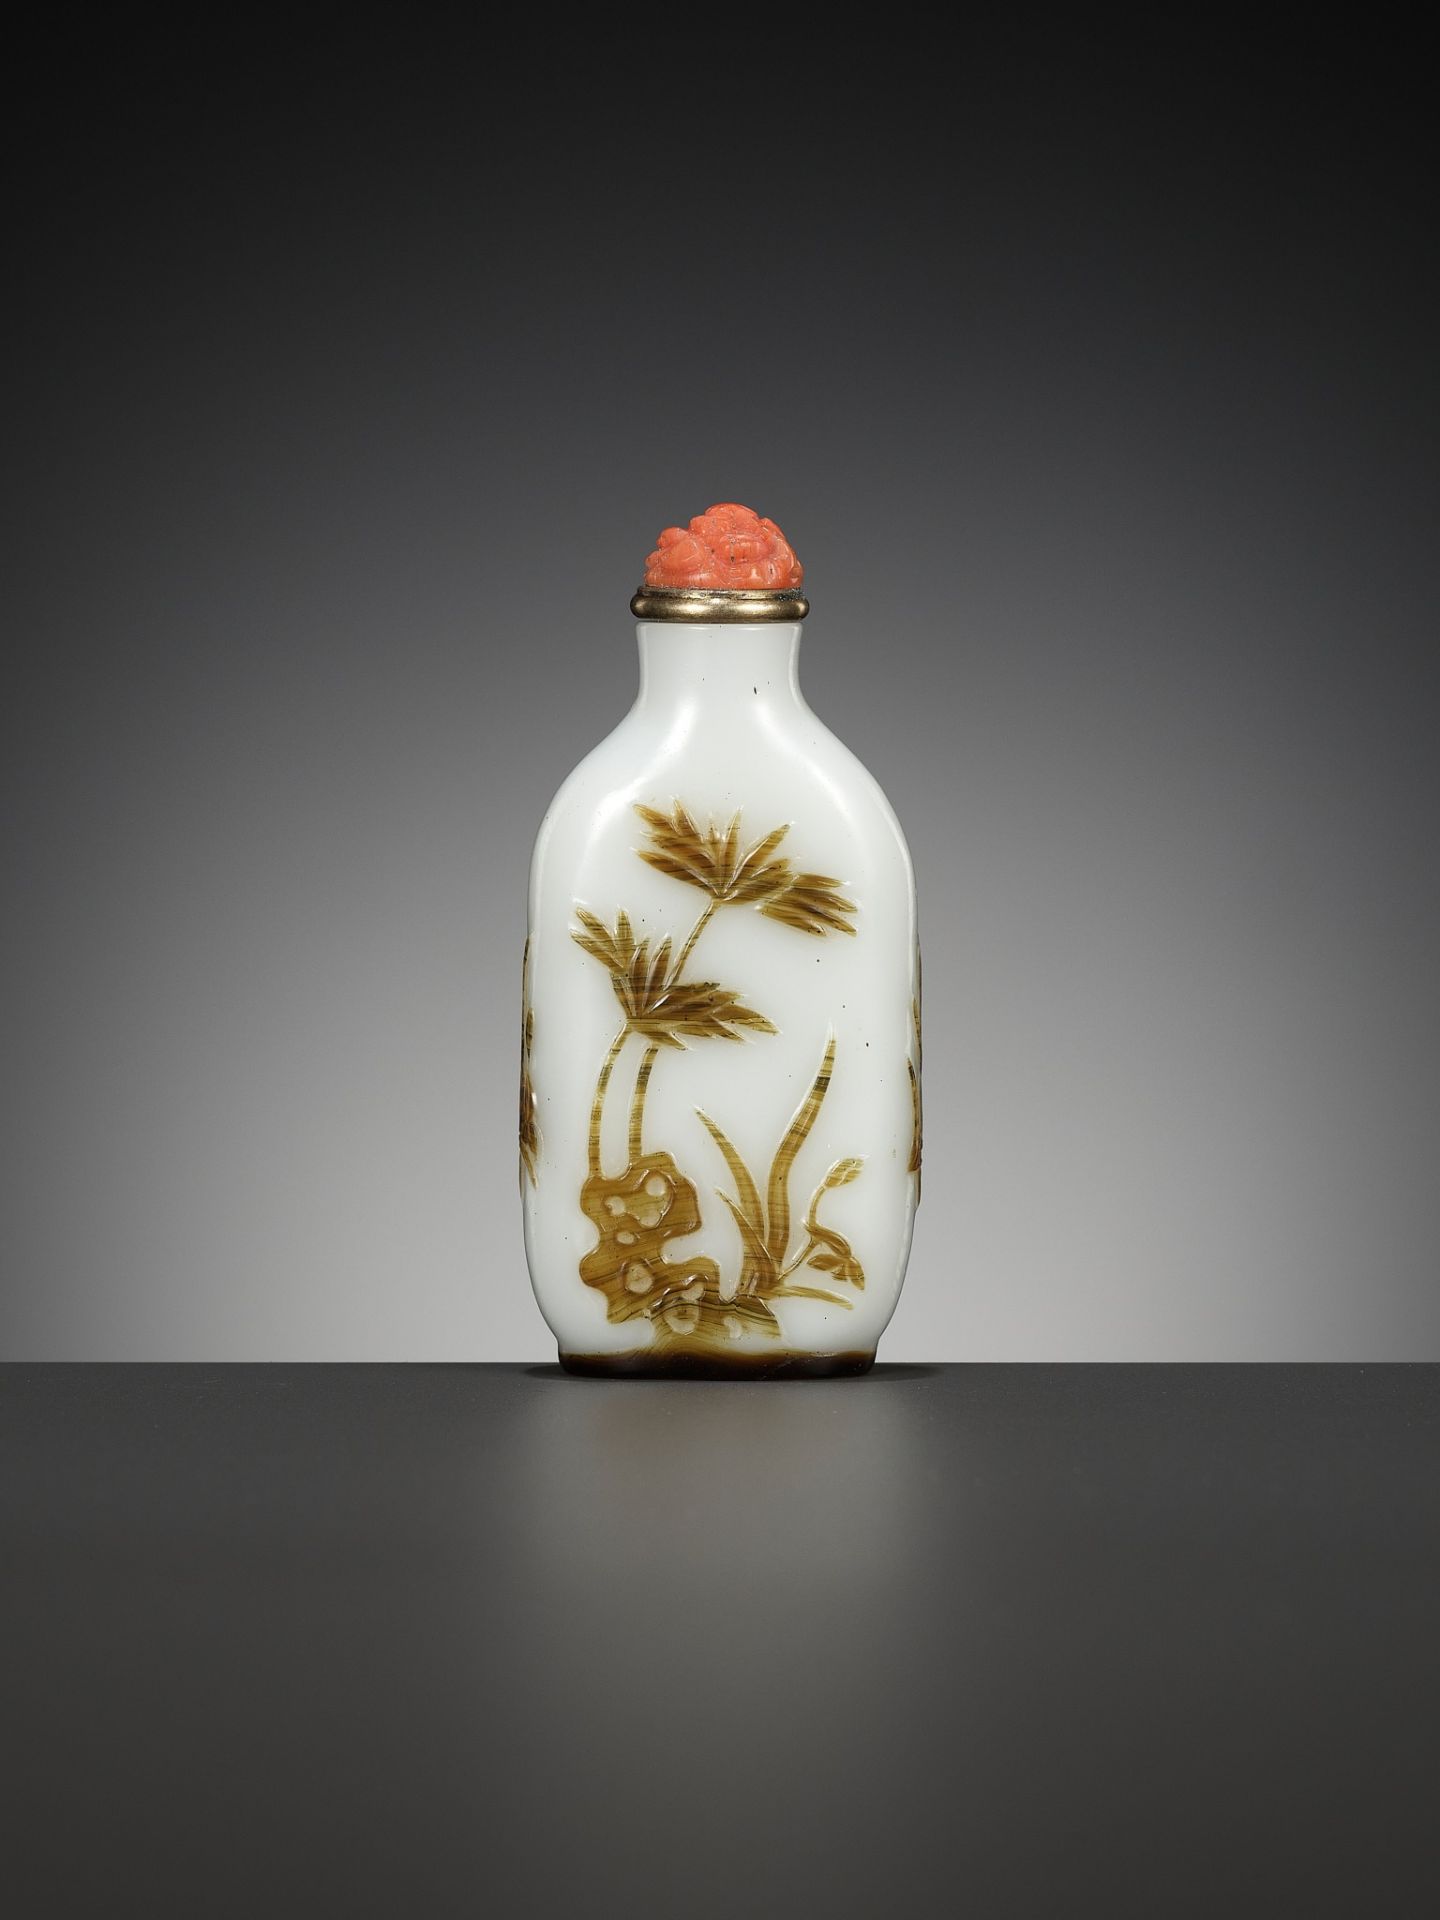 AN INSCRIBED OVERLAY GLASS ‘CAT AND BUTTERFLY’ SNUFF BOTTLE, BY WANG SU, YANGZHOU SCHOOL, 1820-1840 - Image 3 of 19